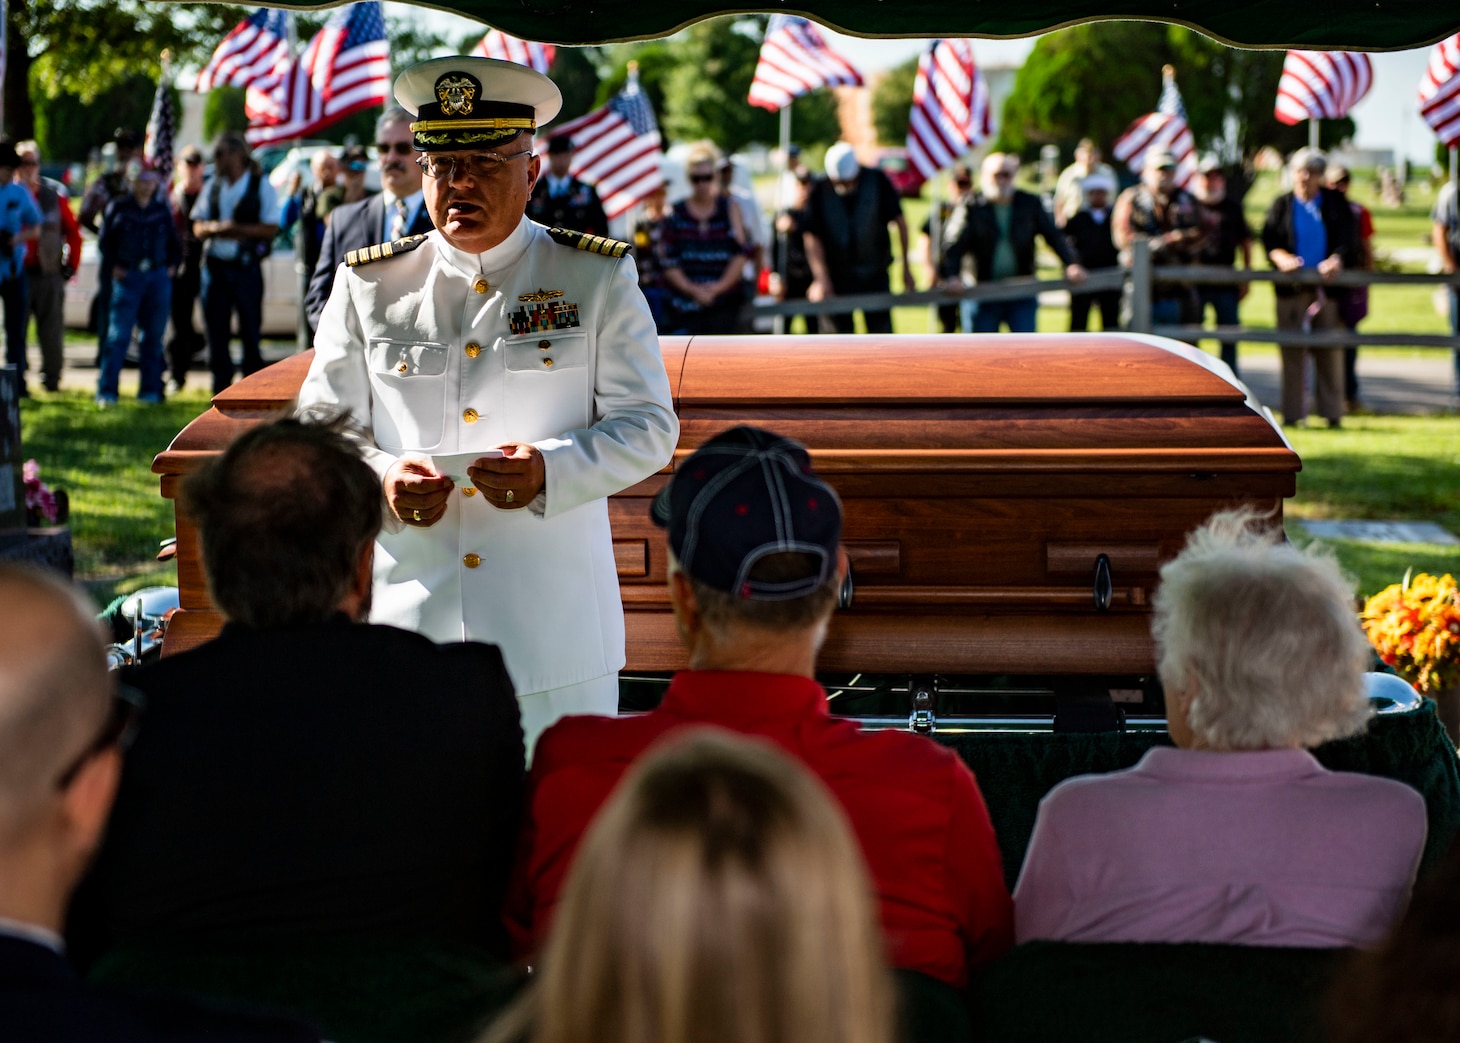 A sailor delivers remarks in front of a casket.